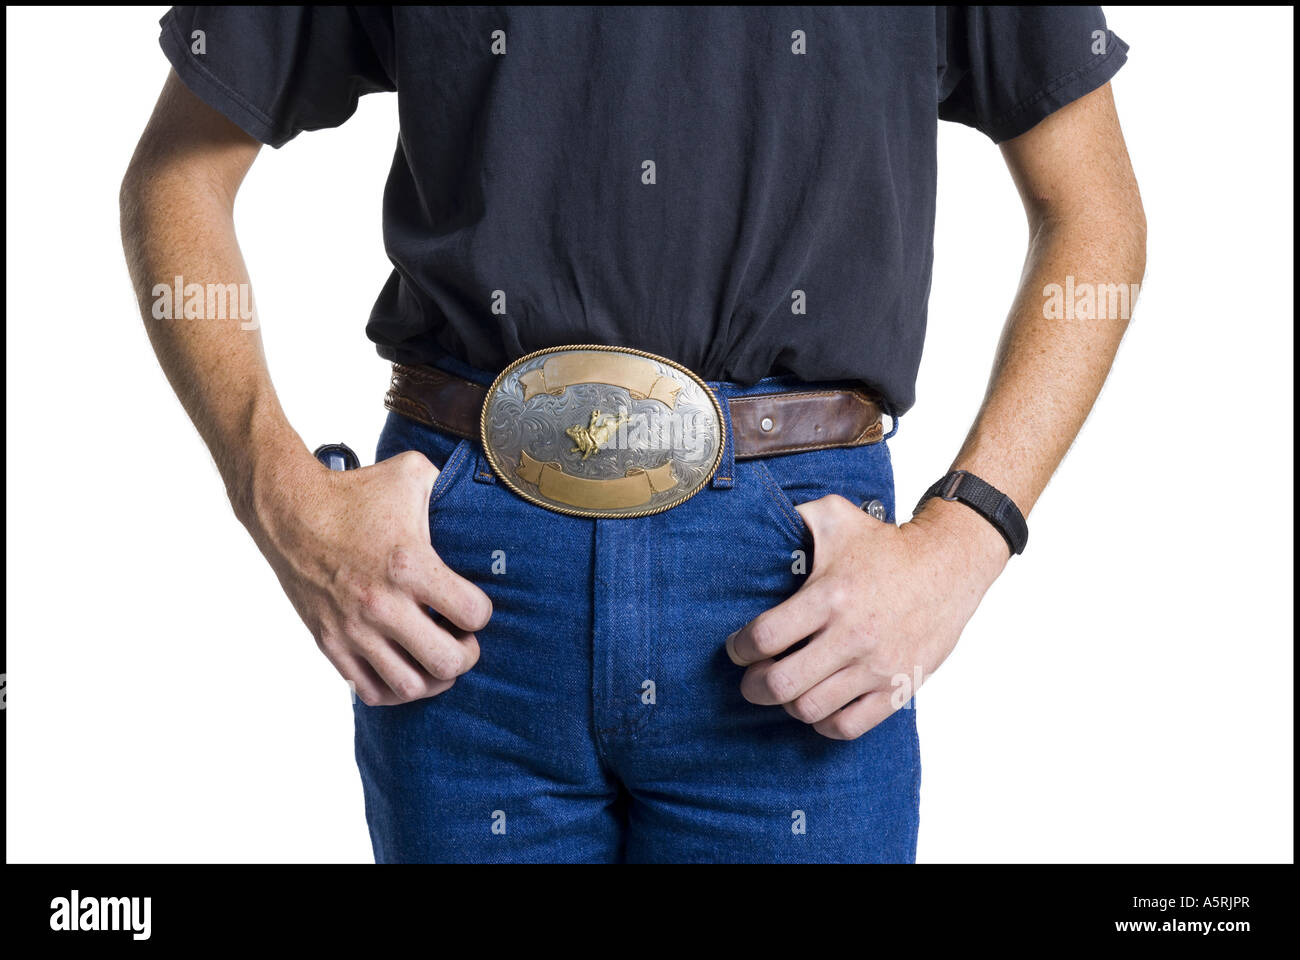 large belt buckles for sale Cheaper Than Retail Price> Buy Clothing ...